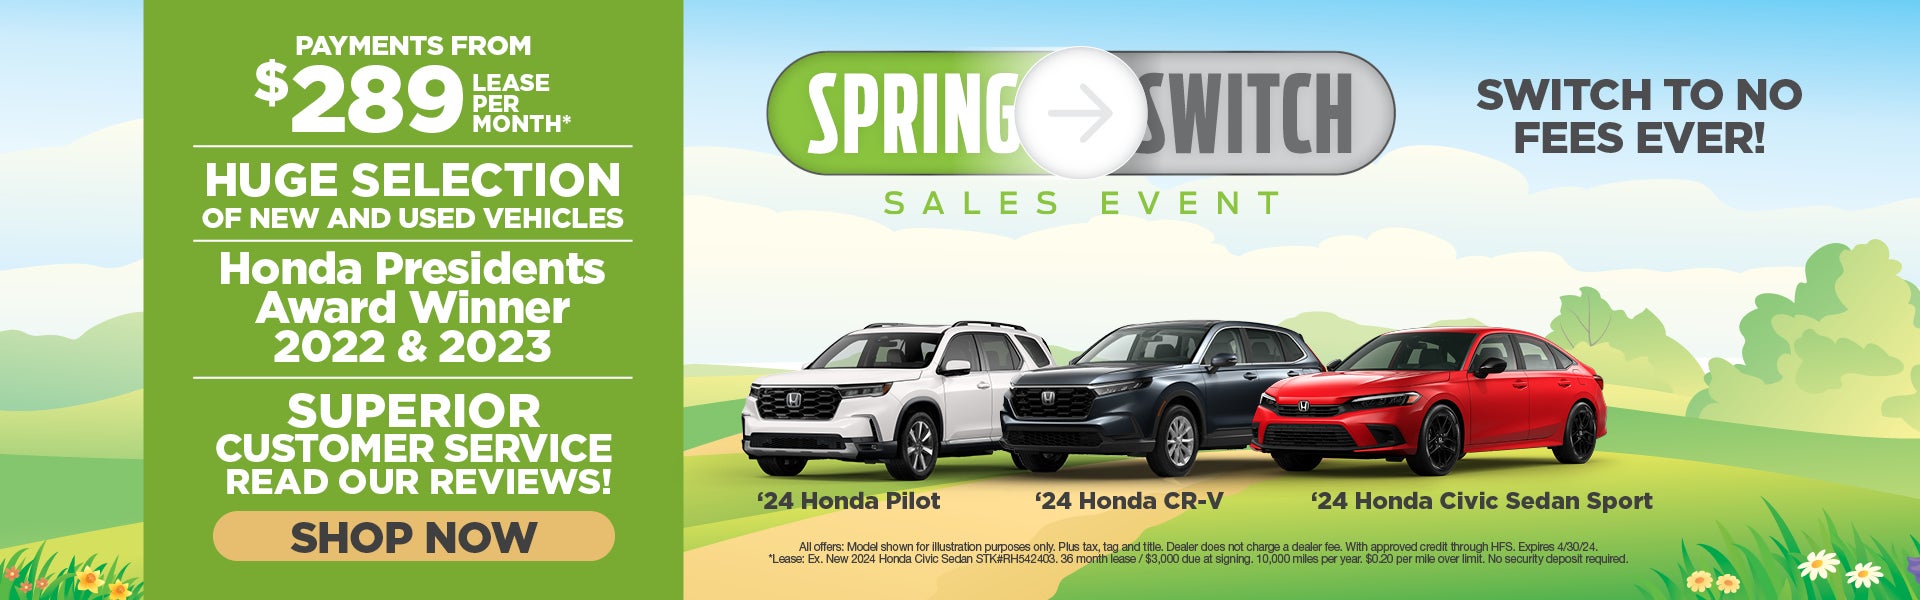 The Spring Switch Sales Event!